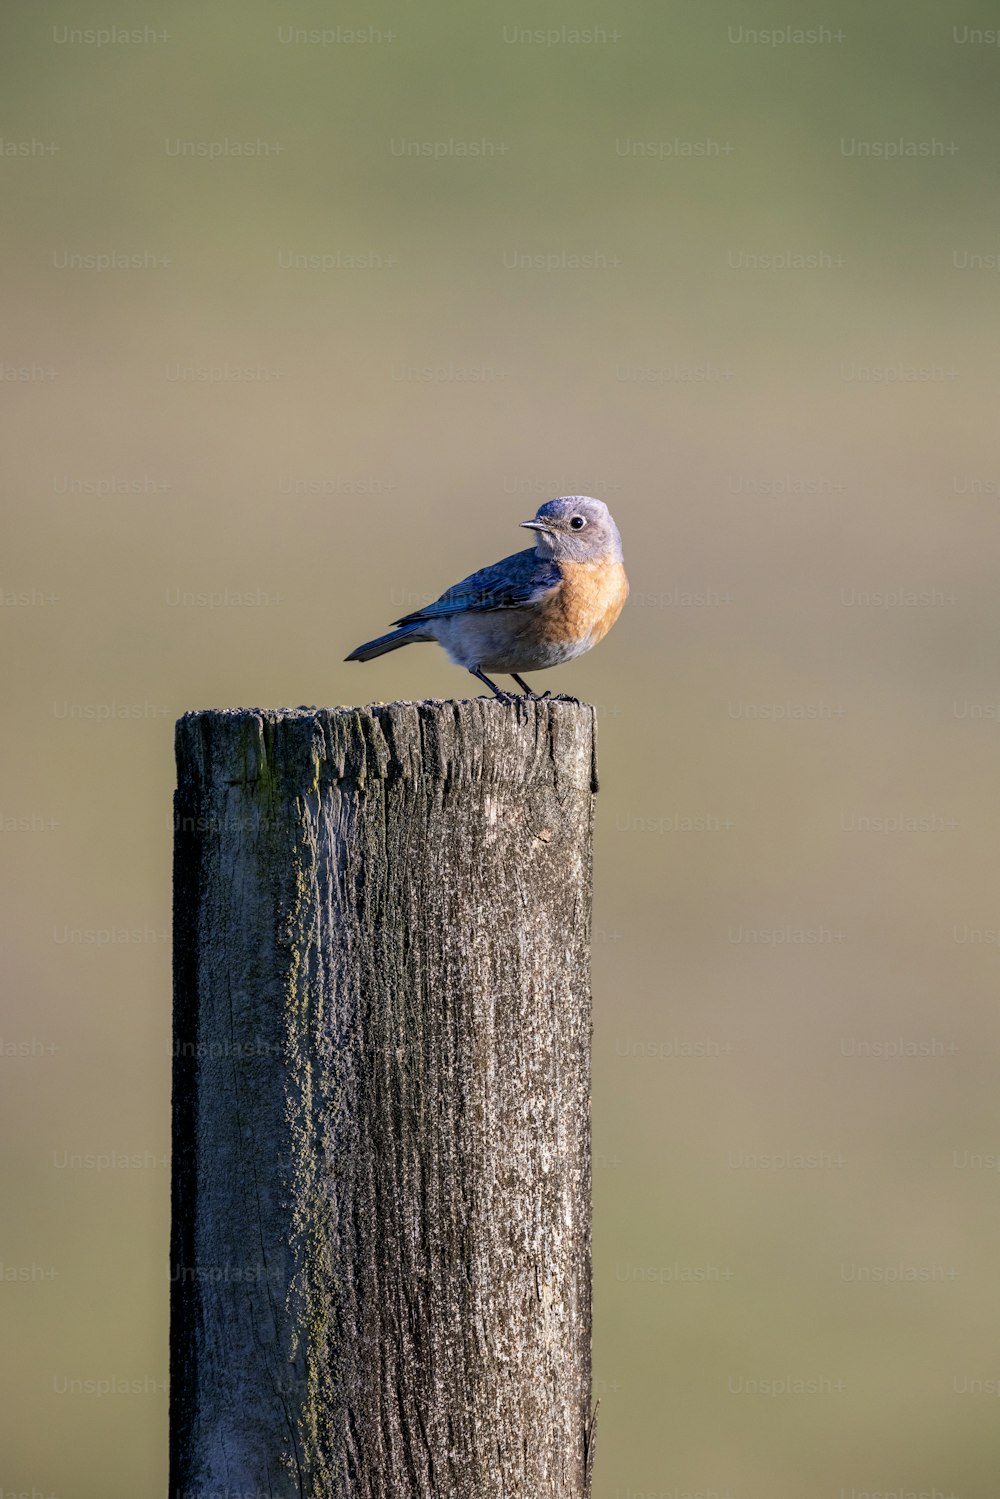 a small bird sitting on top of a wooden post